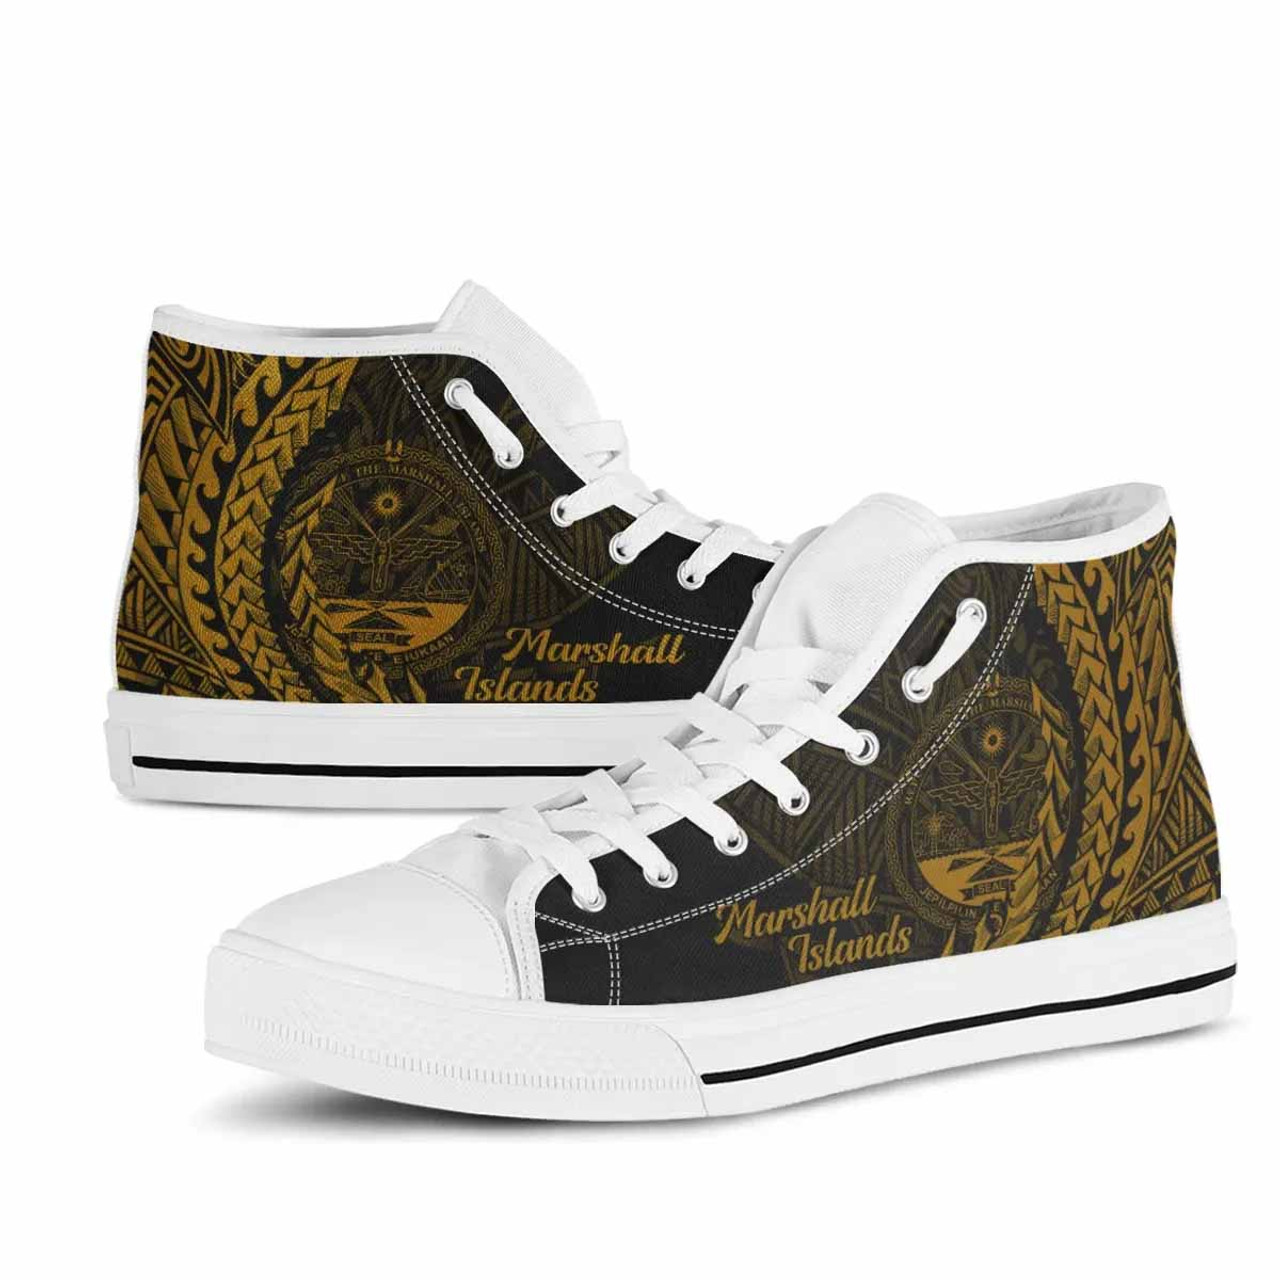 Marshall Islands High Top Shoes - Wings Style 4